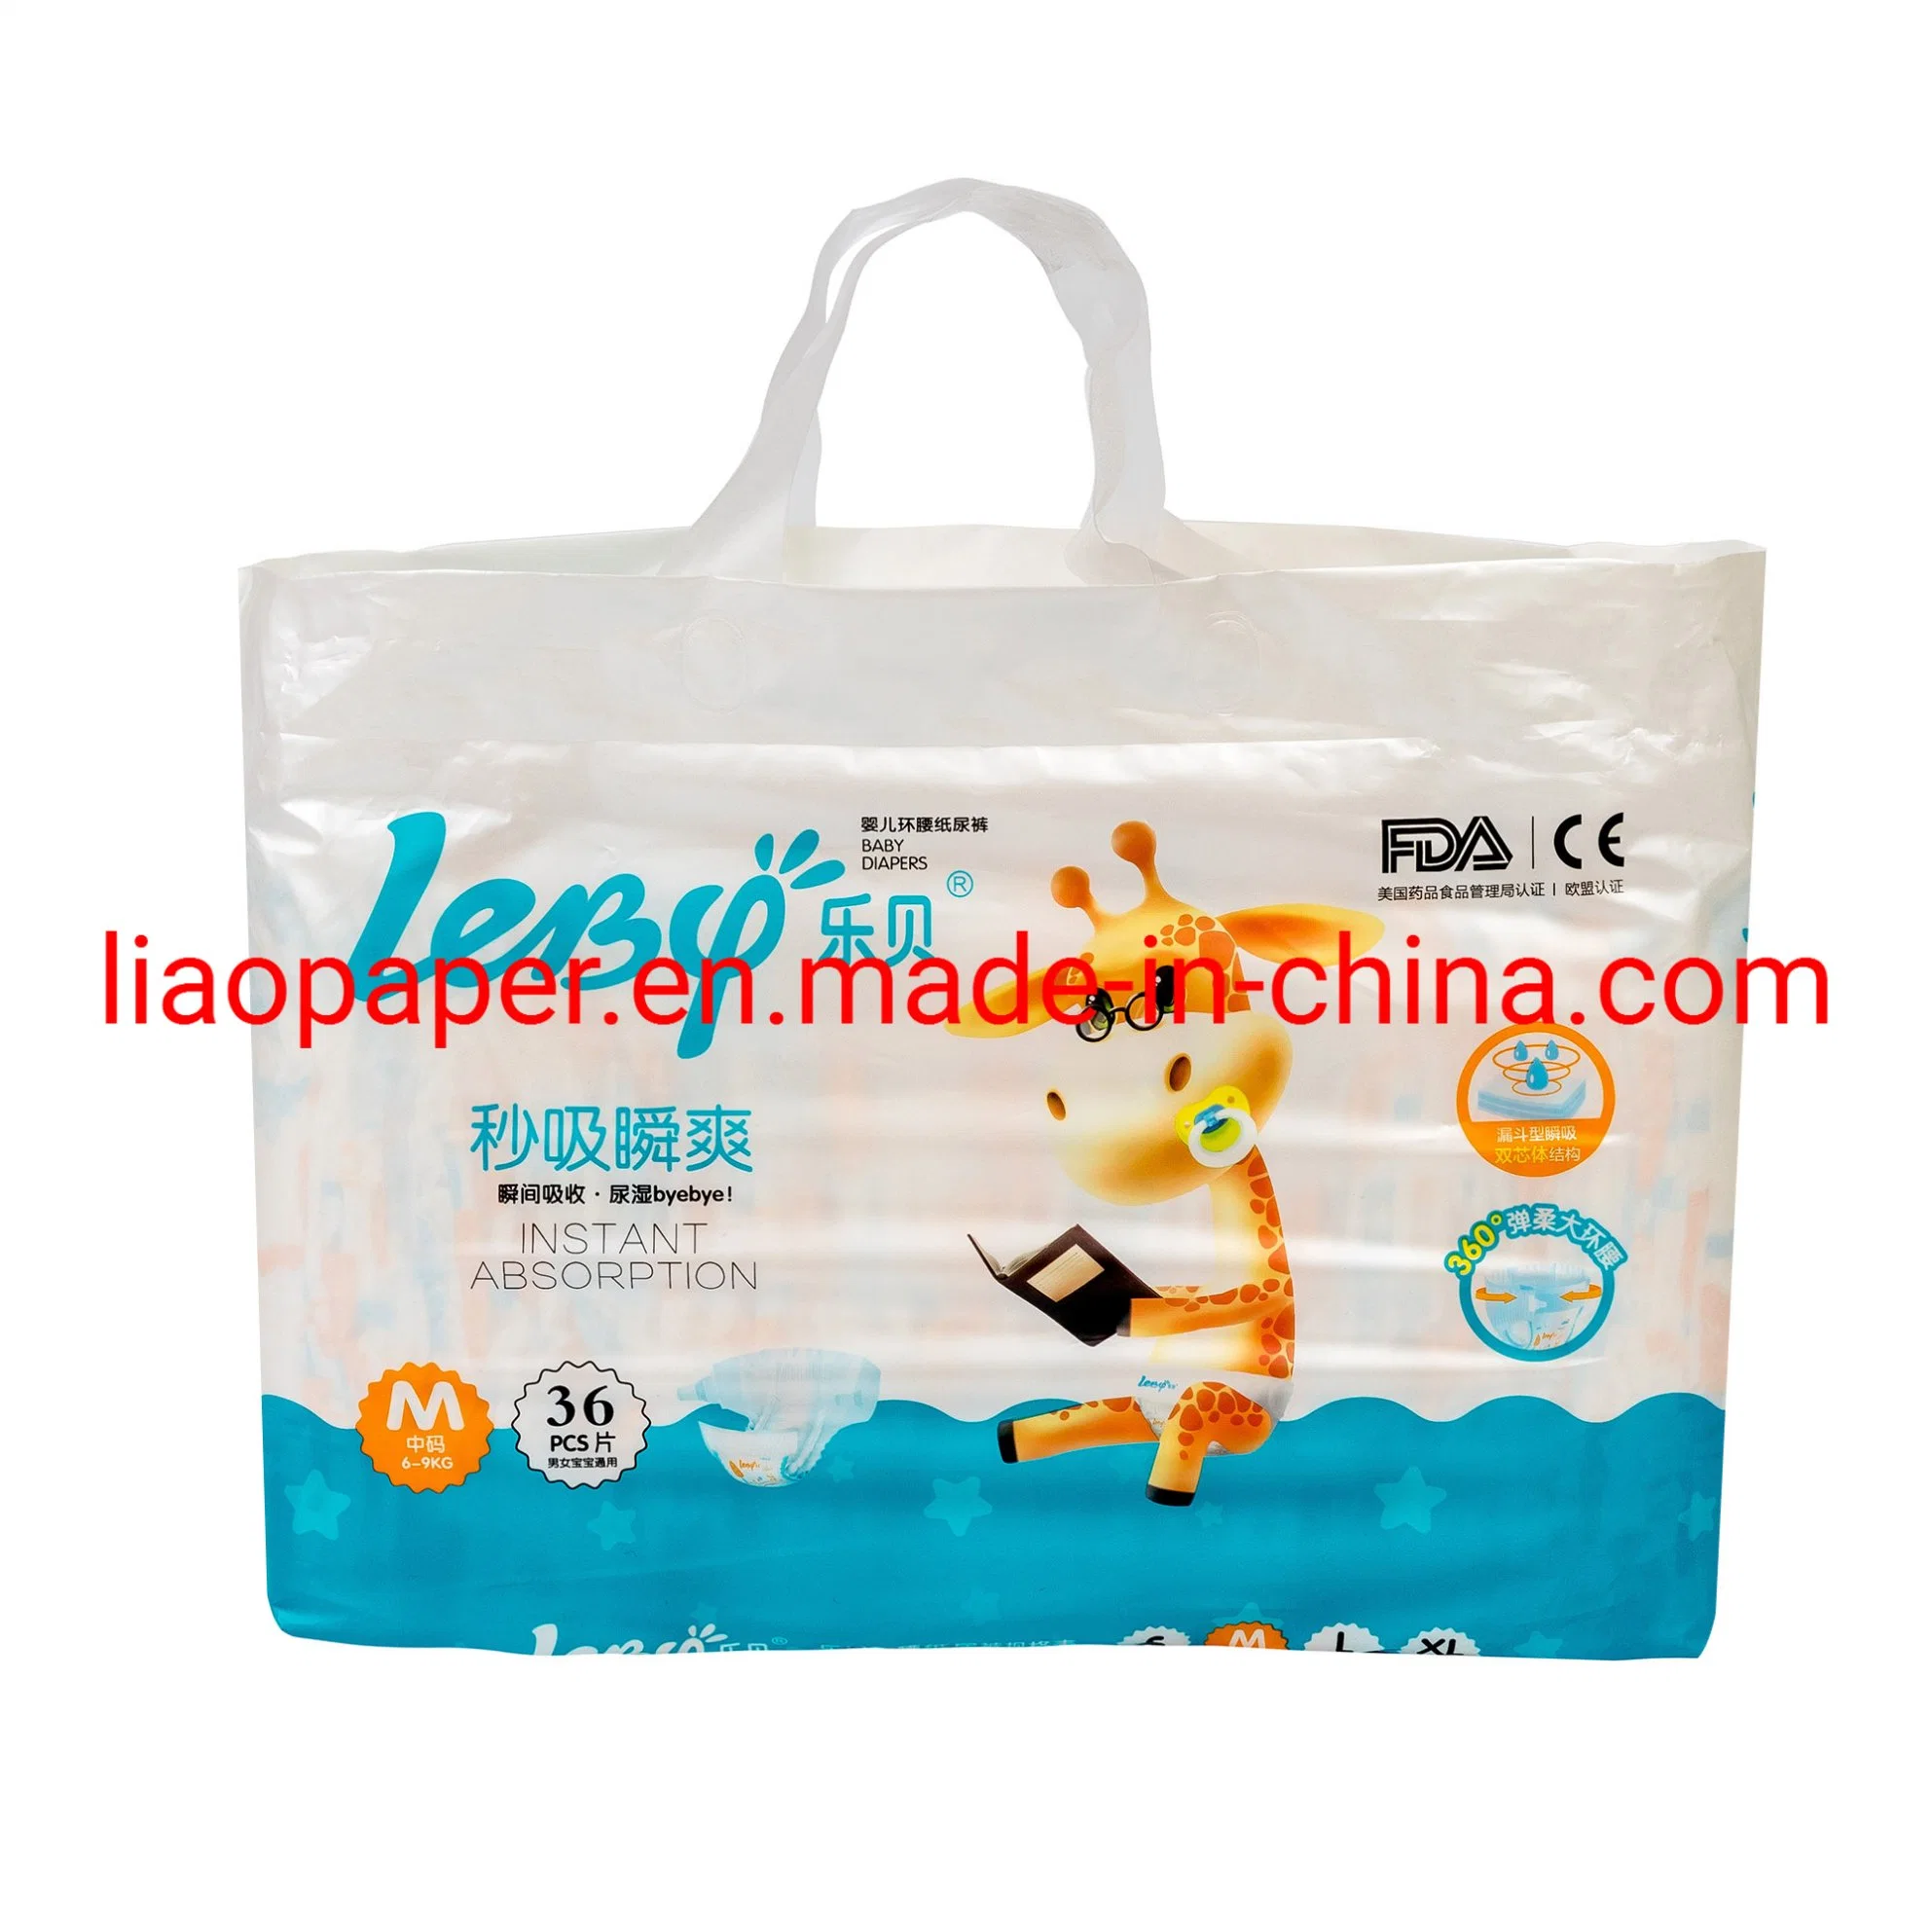 Disposable Baby Diapers Products with High Quality Babies Care Products (diapers nappies)